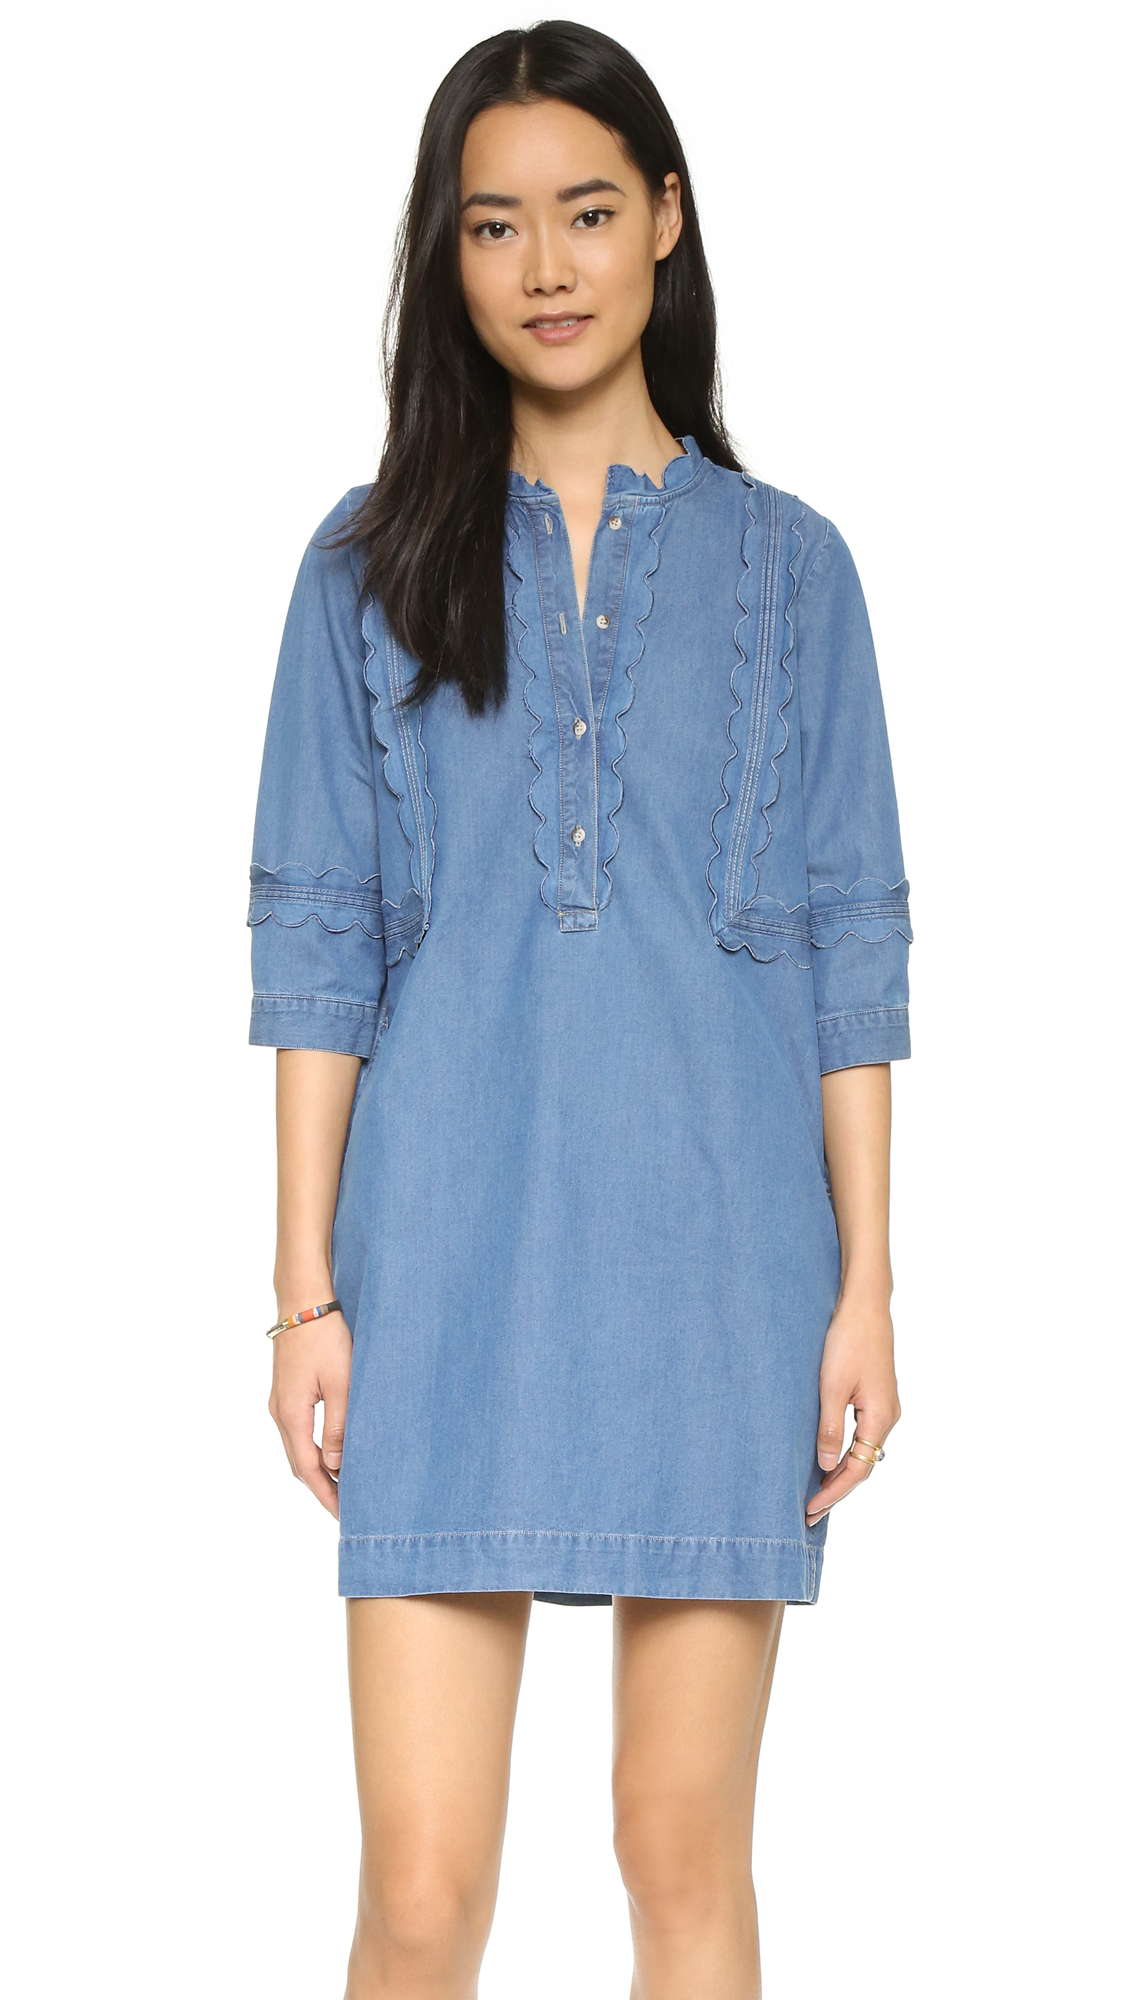 M.i.h Jeans Angie Dress in Blue Chambray (Blue) - Lyst